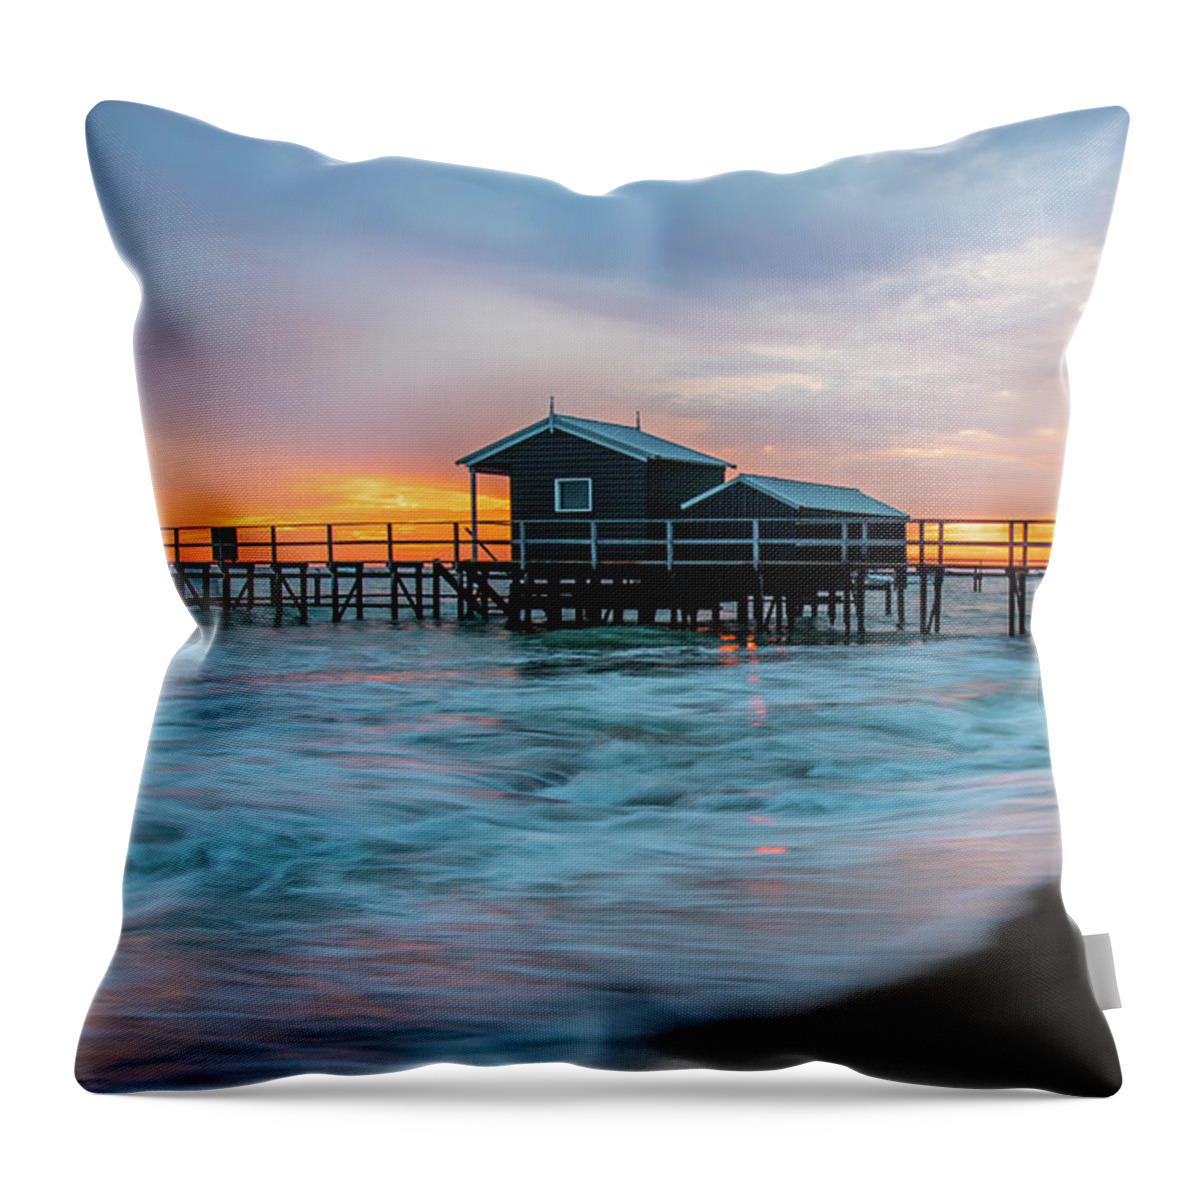 Shelley Beach Throw Pillow featuring the photograph Shelley Beach Boat Jetty by Vicki Walsh